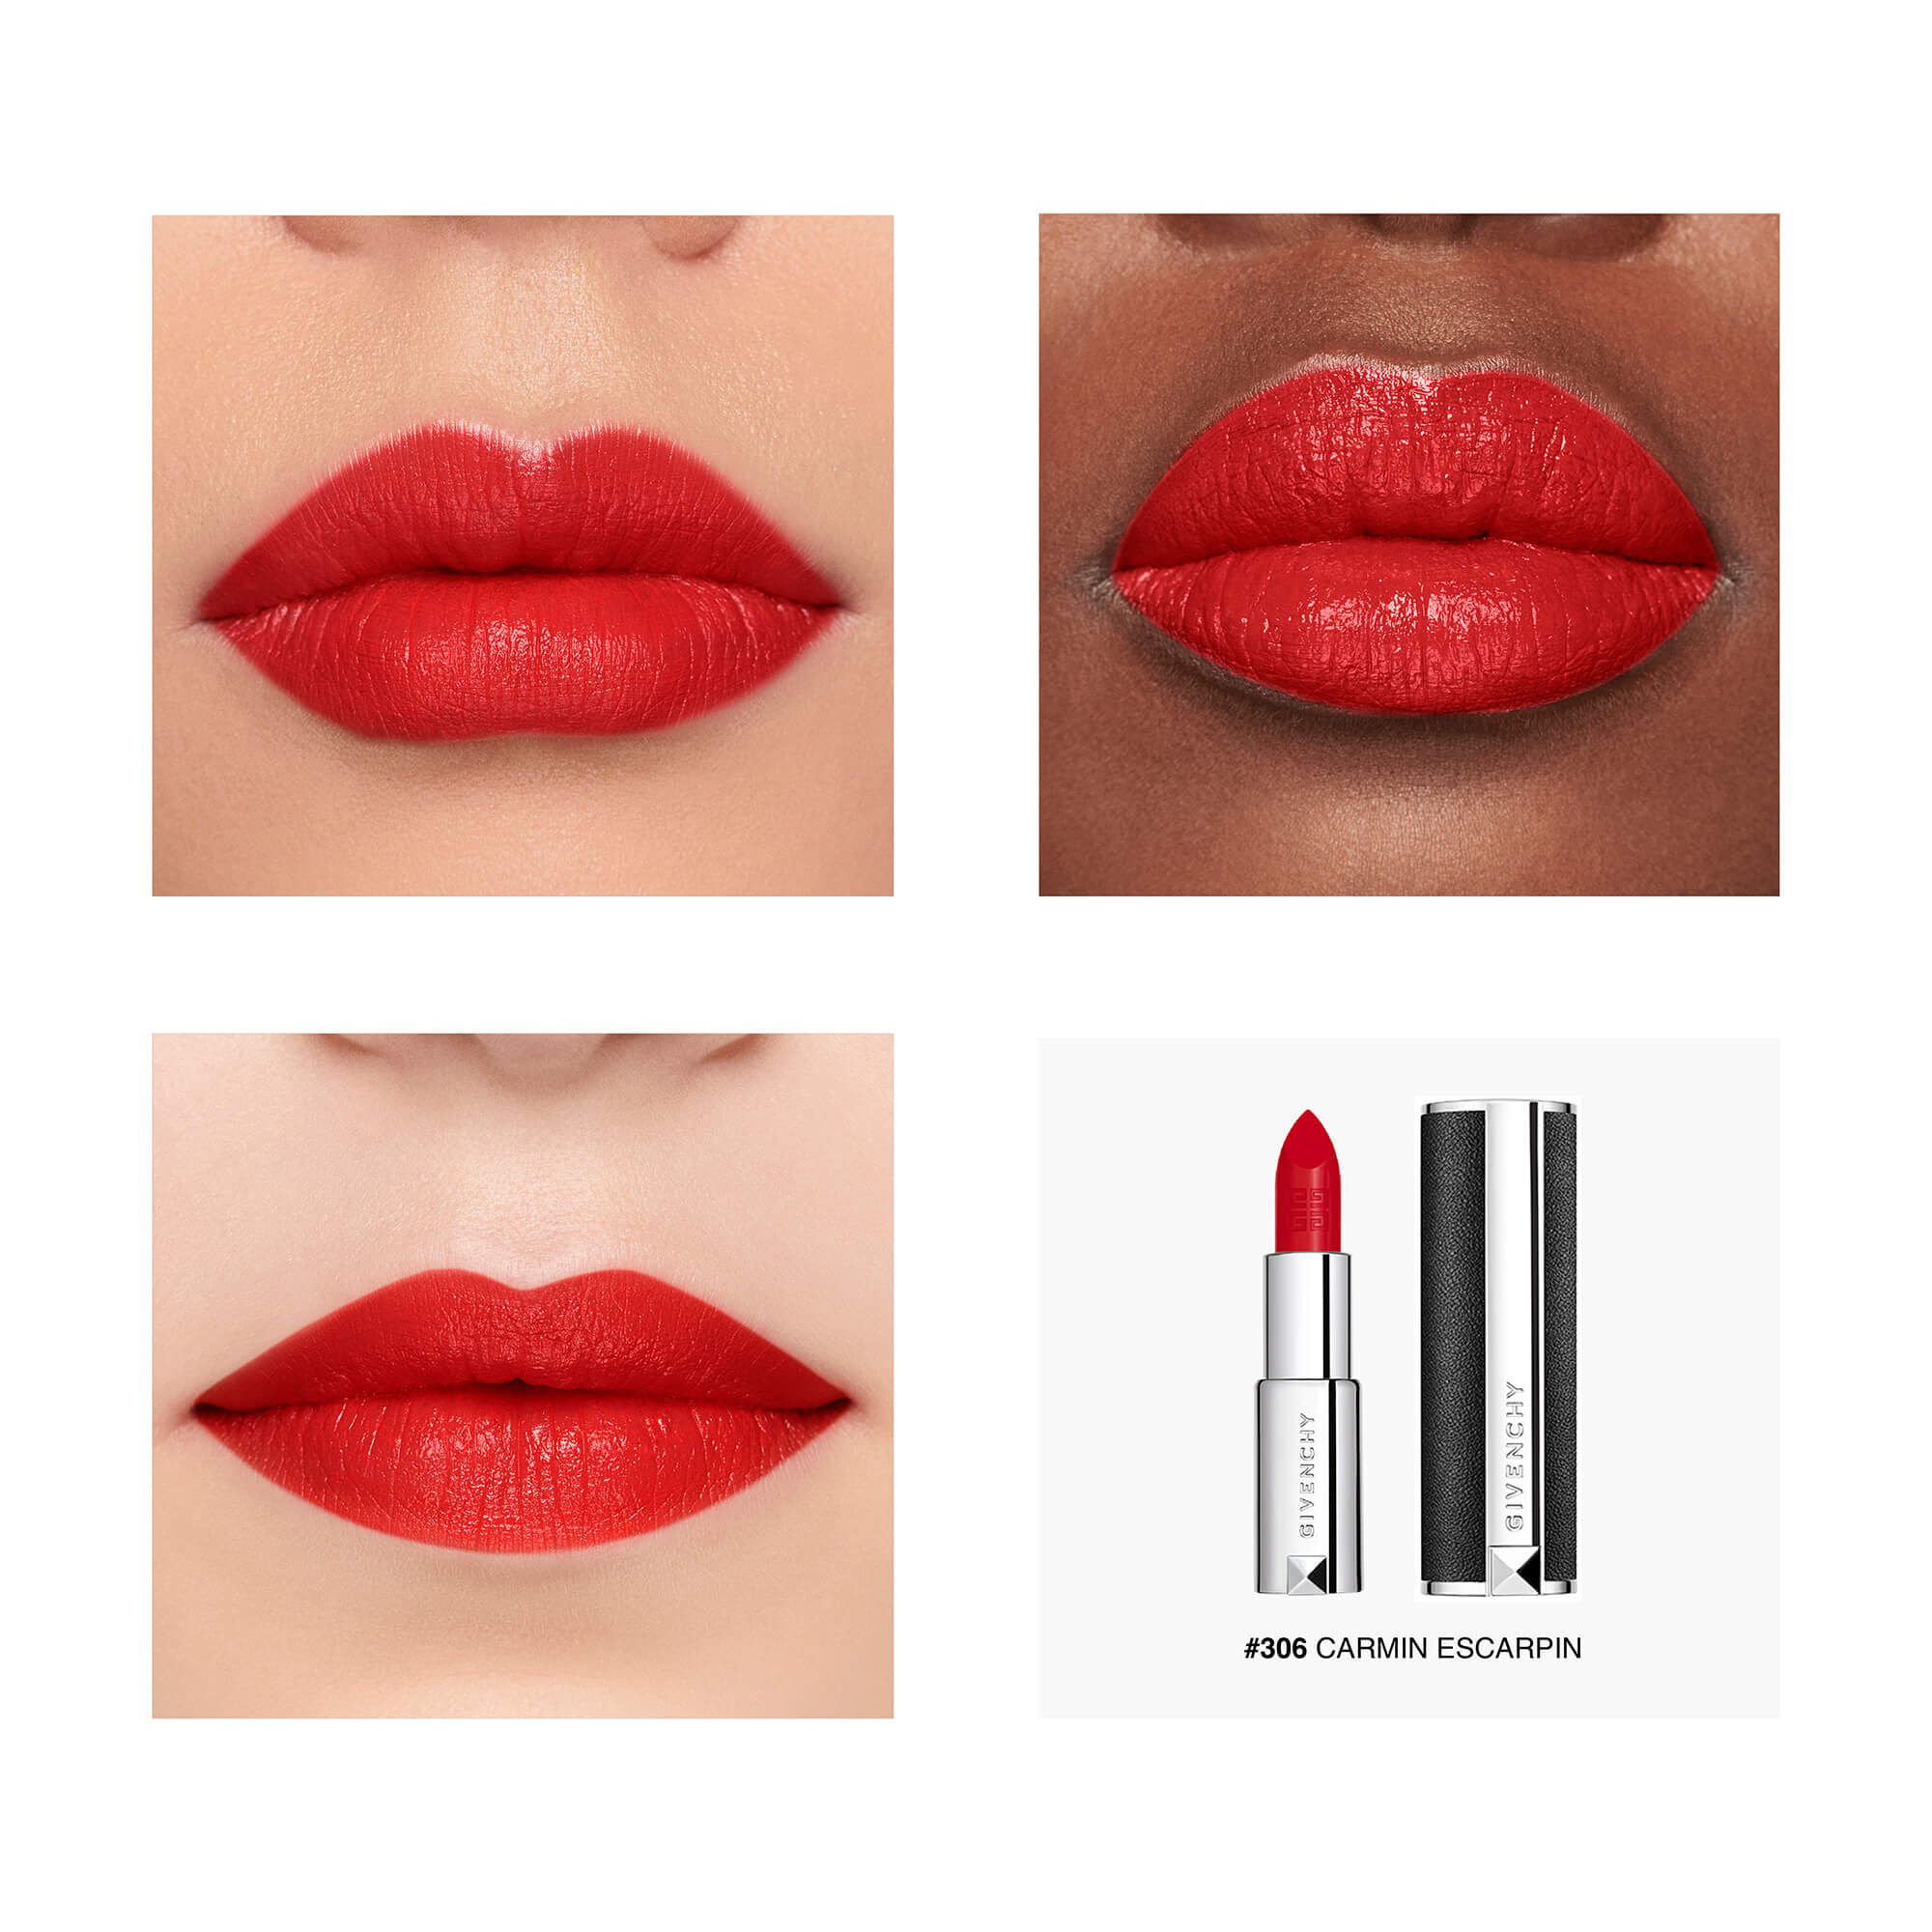 givenchy le rouge 317